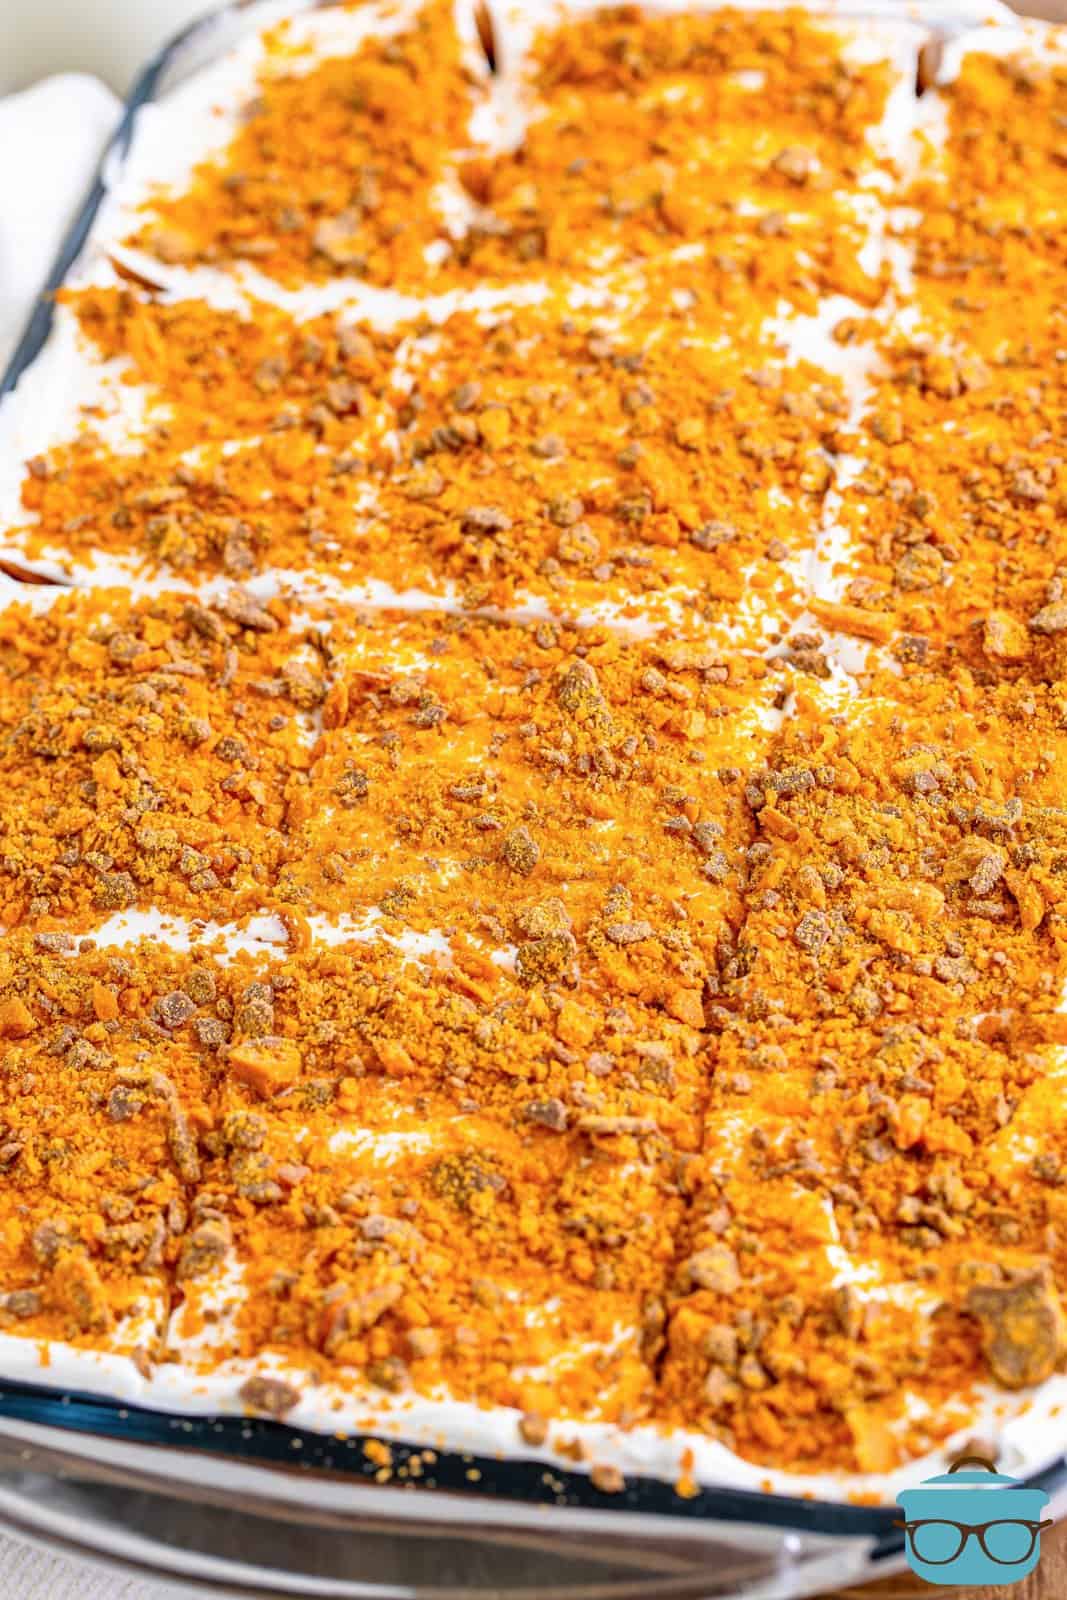 Looking down on a baking dish of Butterfinger Lush.